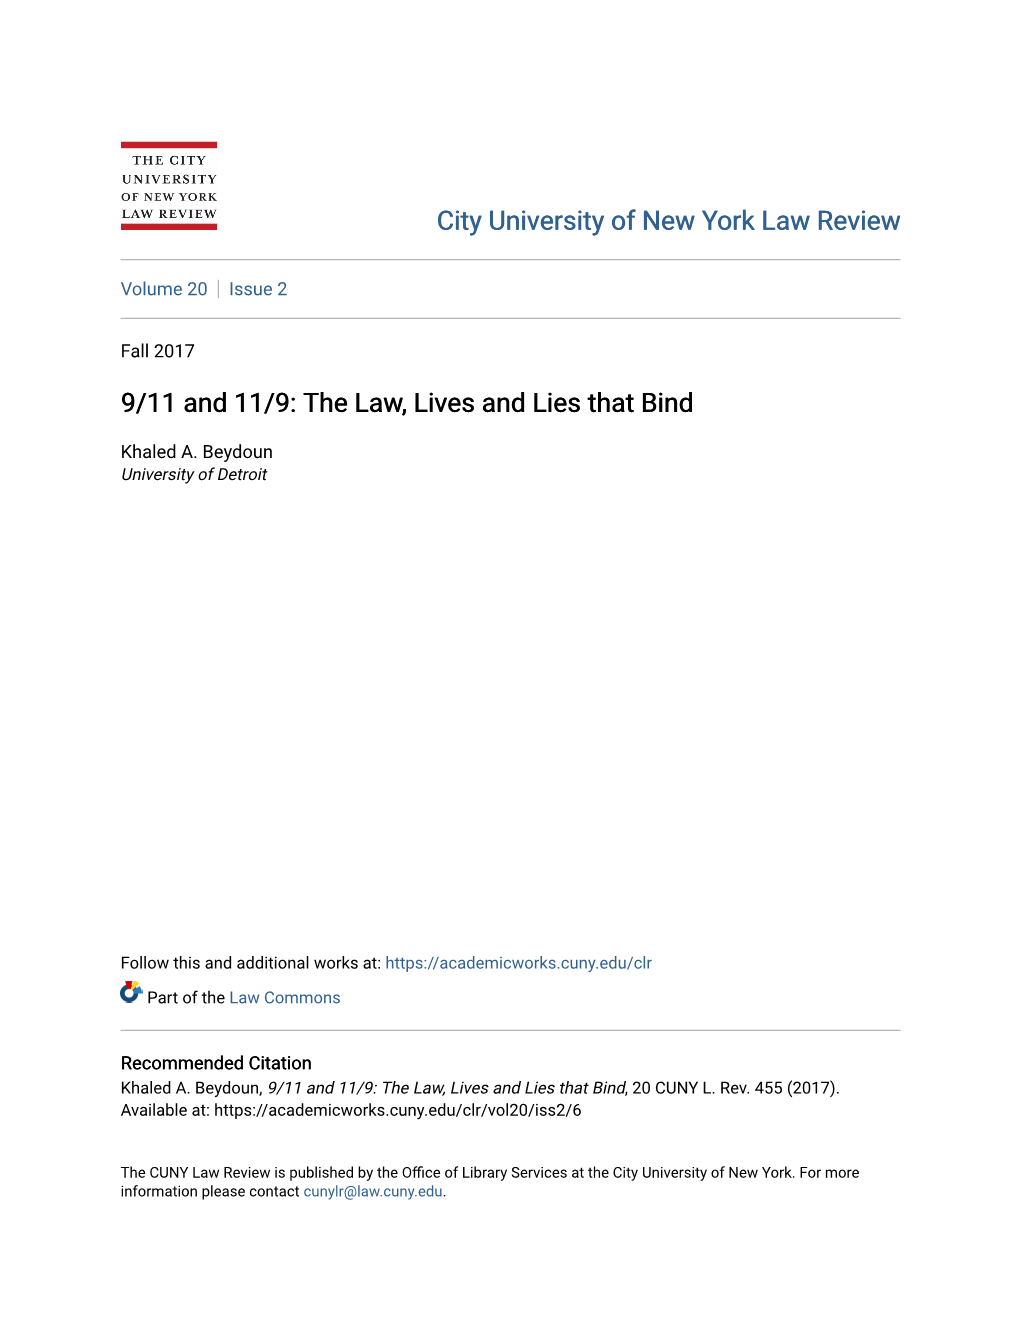 9/11 and 11/9: the Law, Lives and Lies That Bind